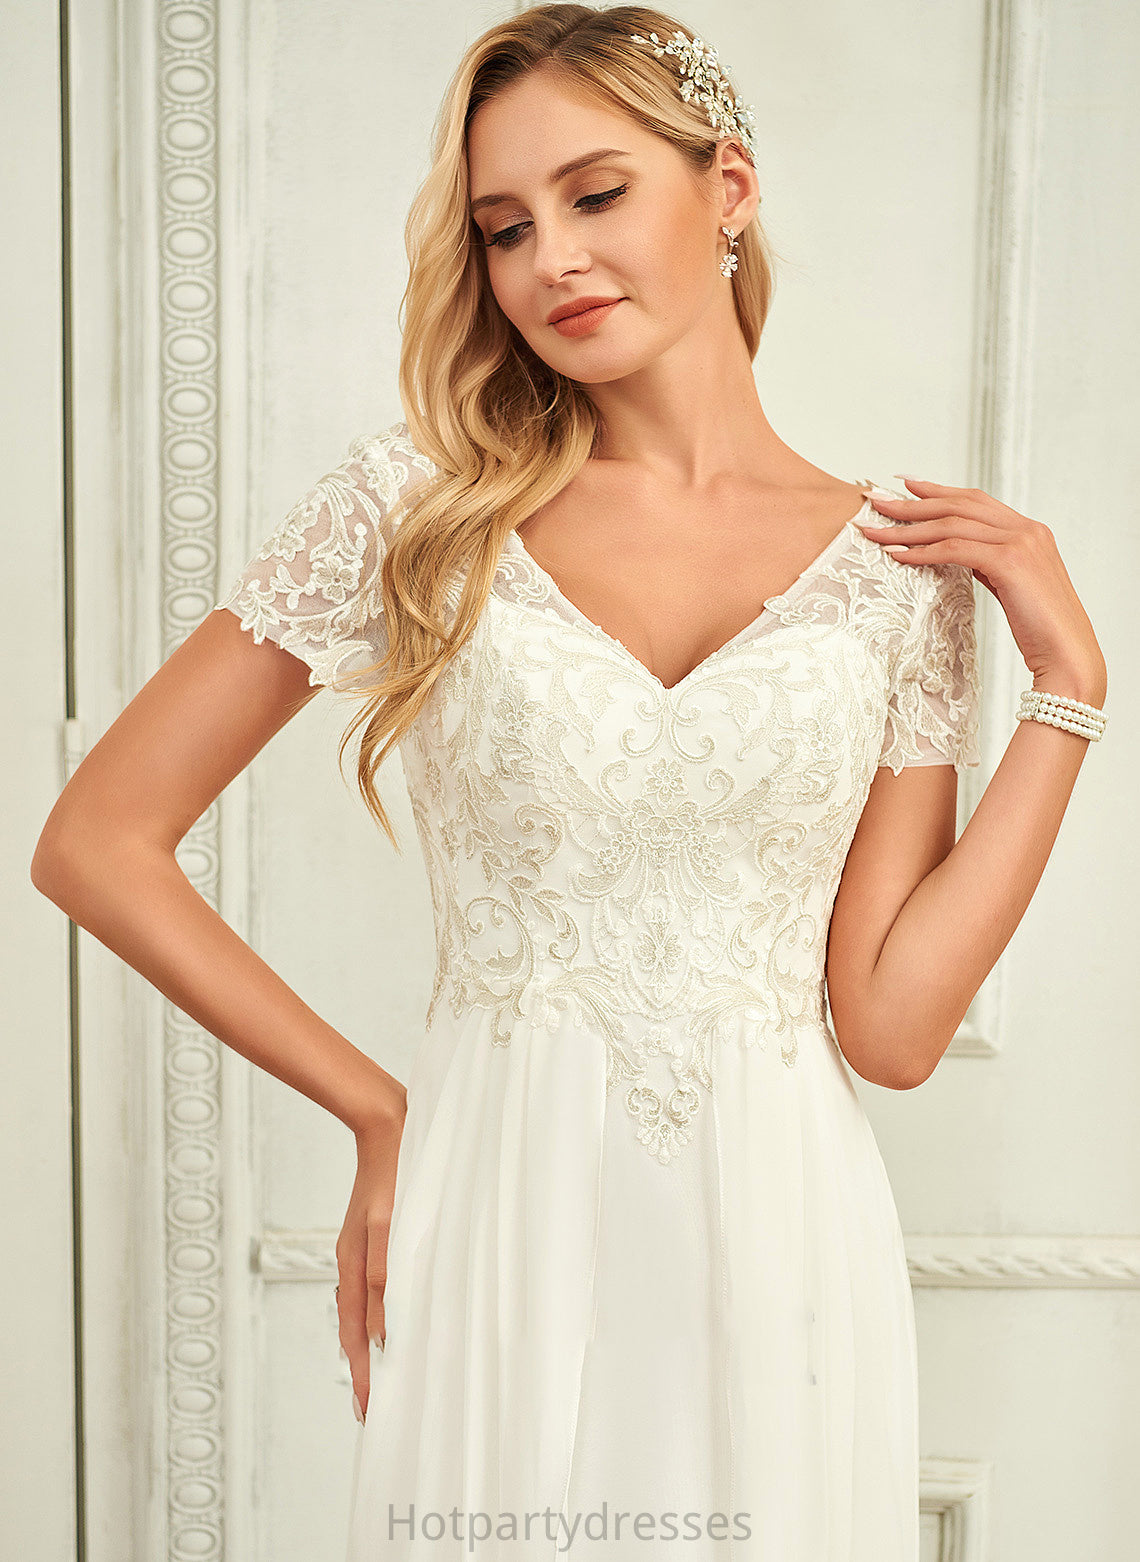 Lace Chiffon Summer Wedding Dresses Wedding Lace With V-neck Floor-Length A-Line Dress